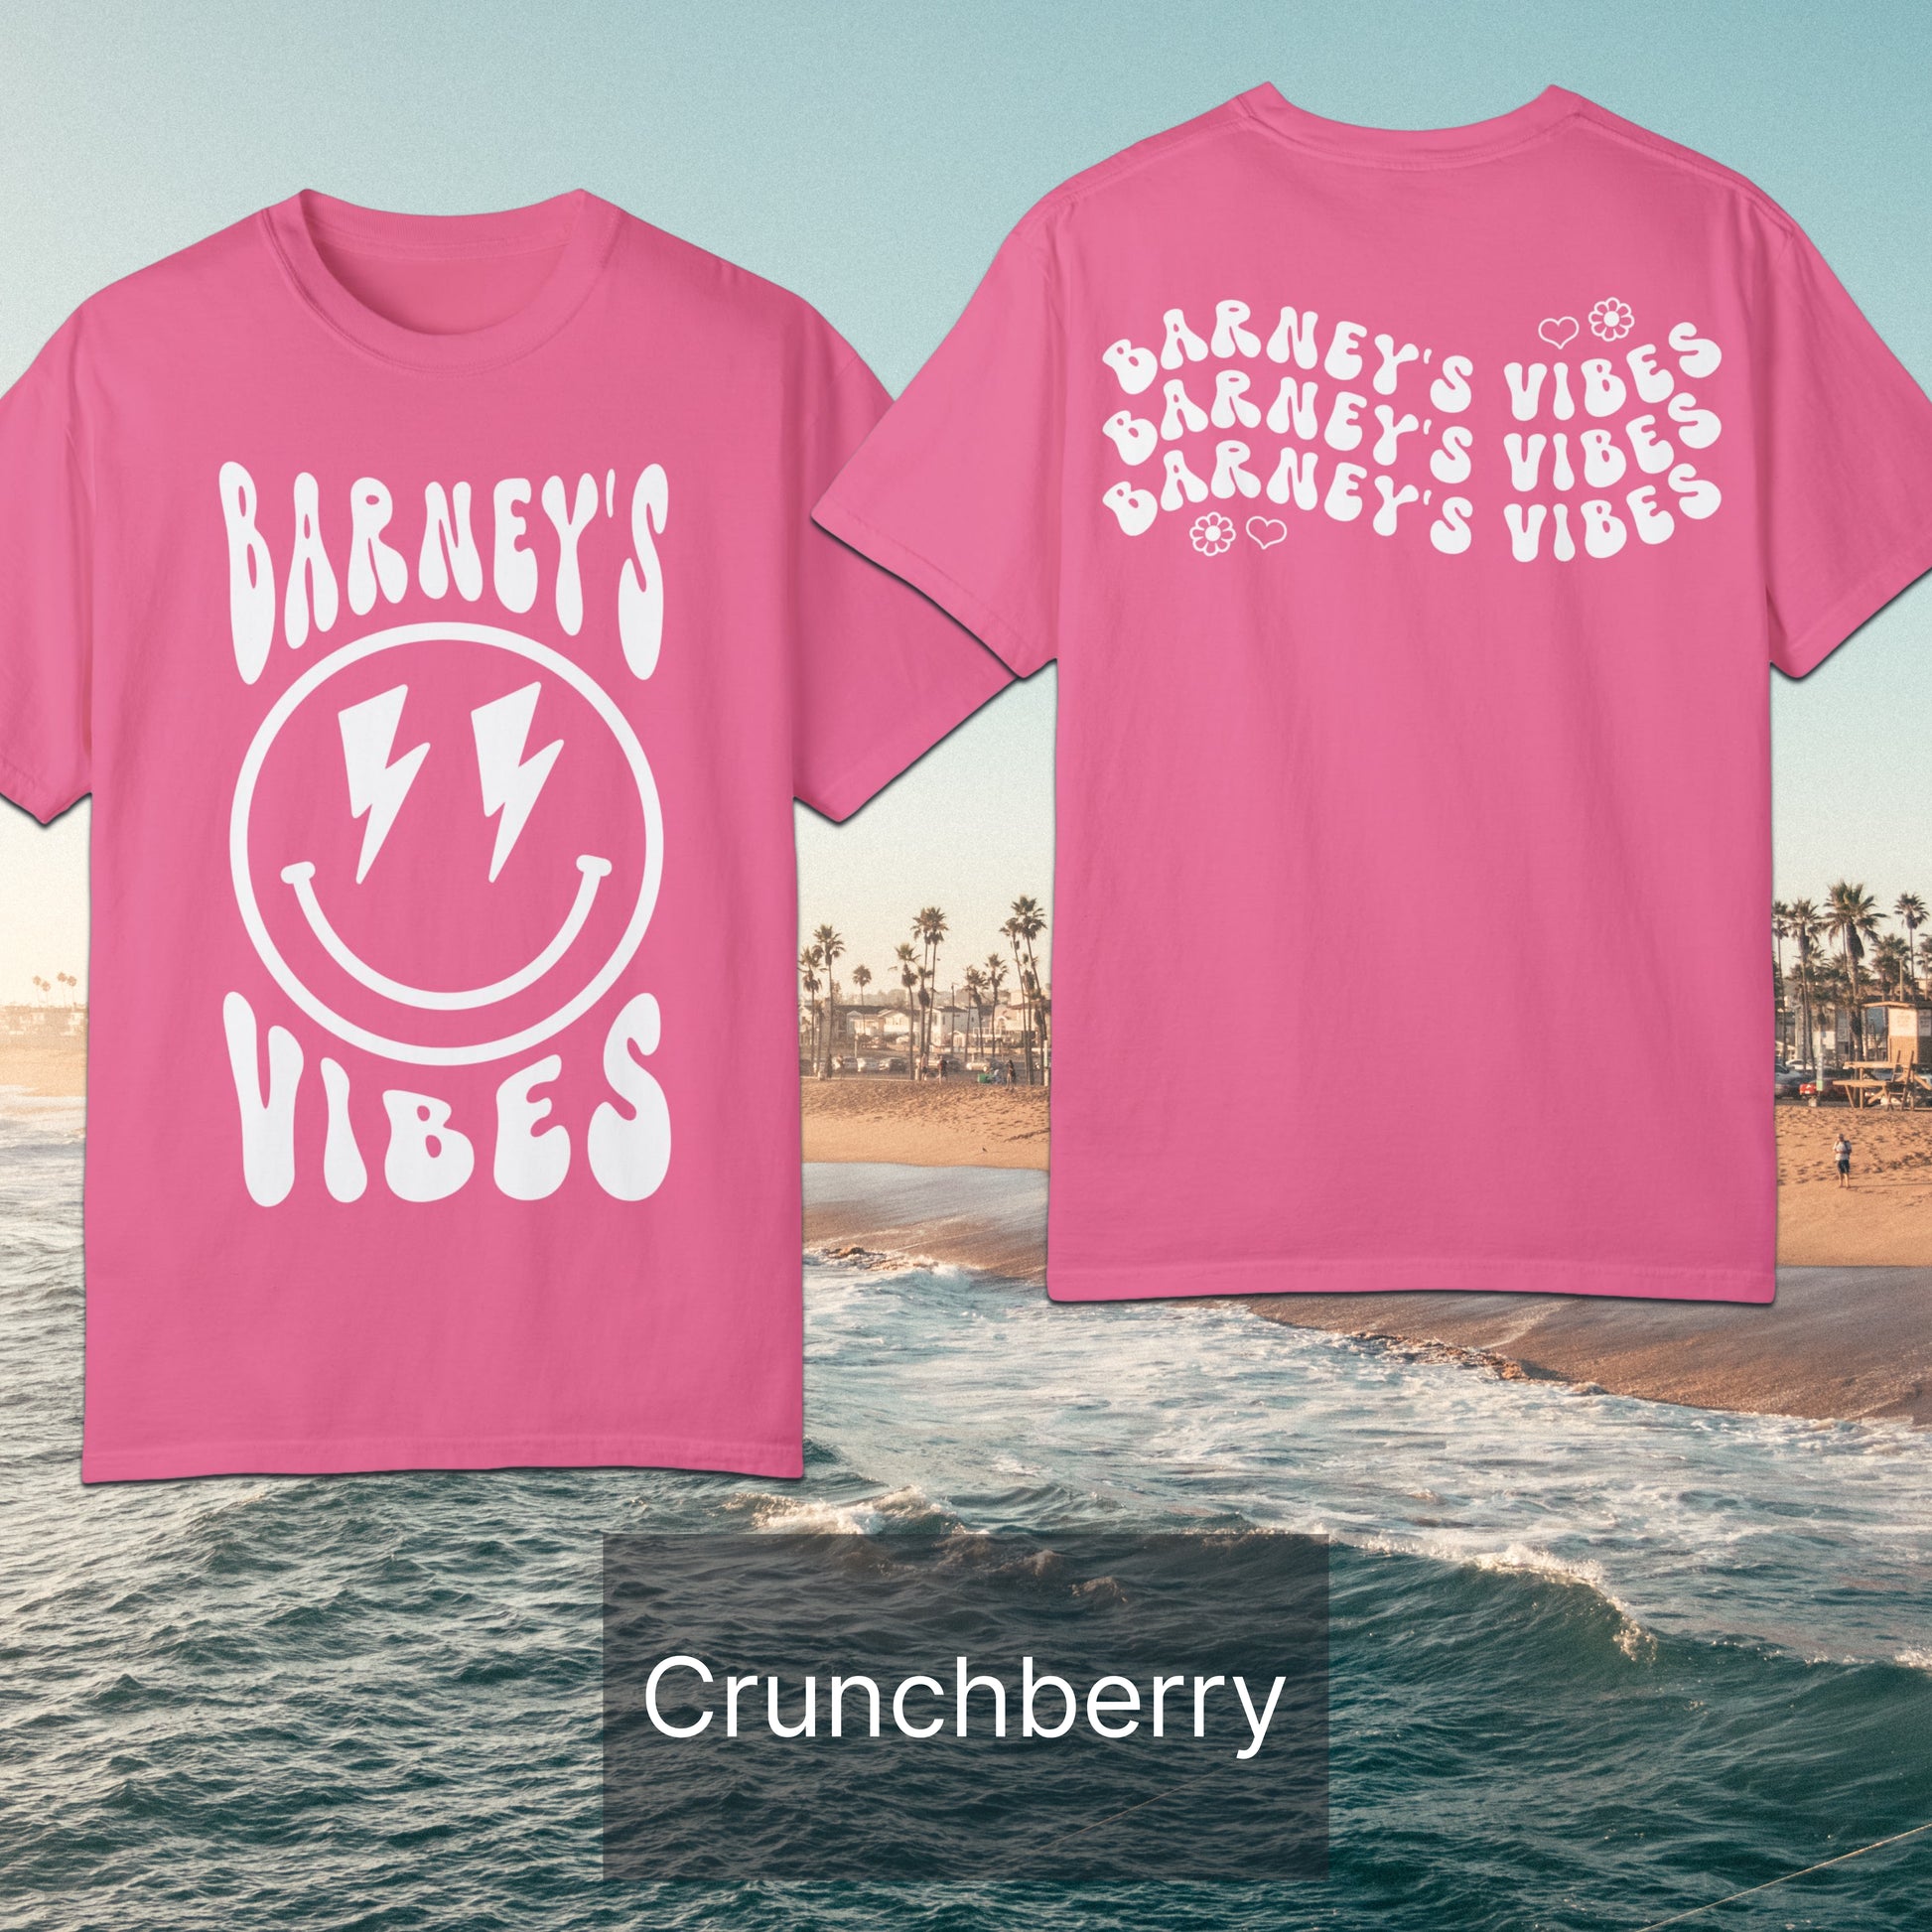 Barney's Vibes | BARNEY'S BEANERY - Women's Smiley Face Tee | White Graphics On Crunchberry T-Shirt, Front And Back Flat Lay View